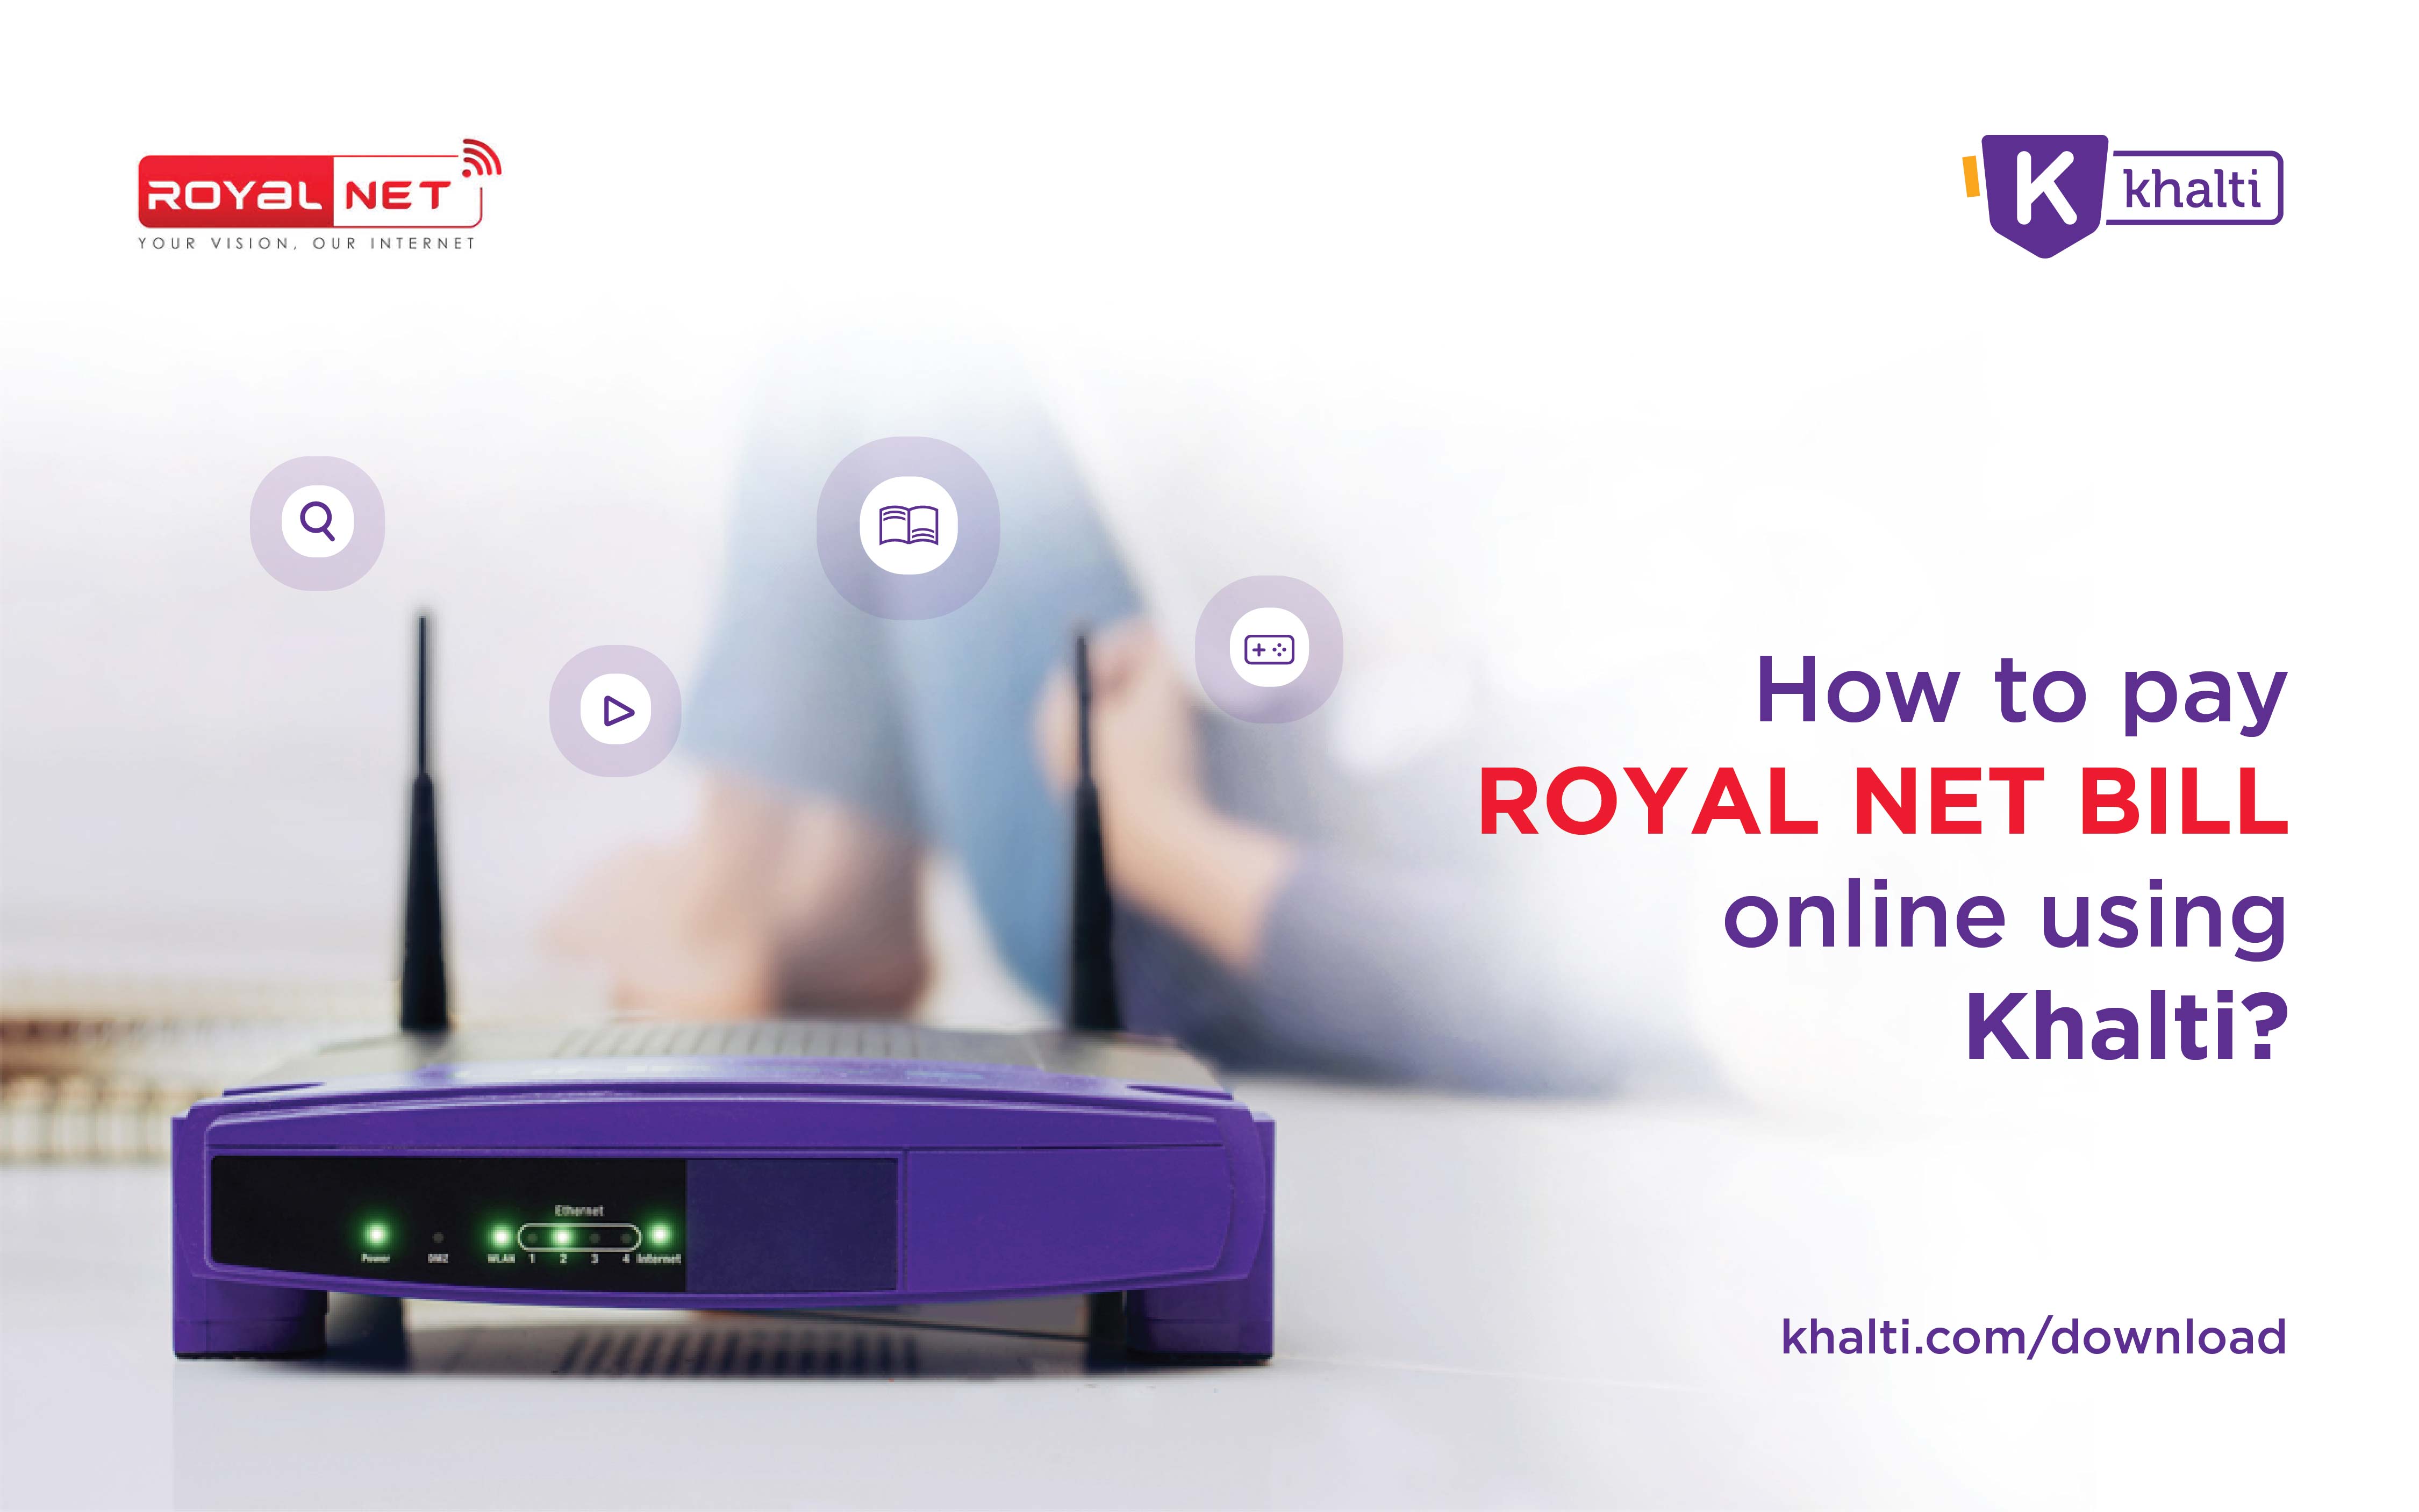 How to pay Royal Network Bill online using Khalti?